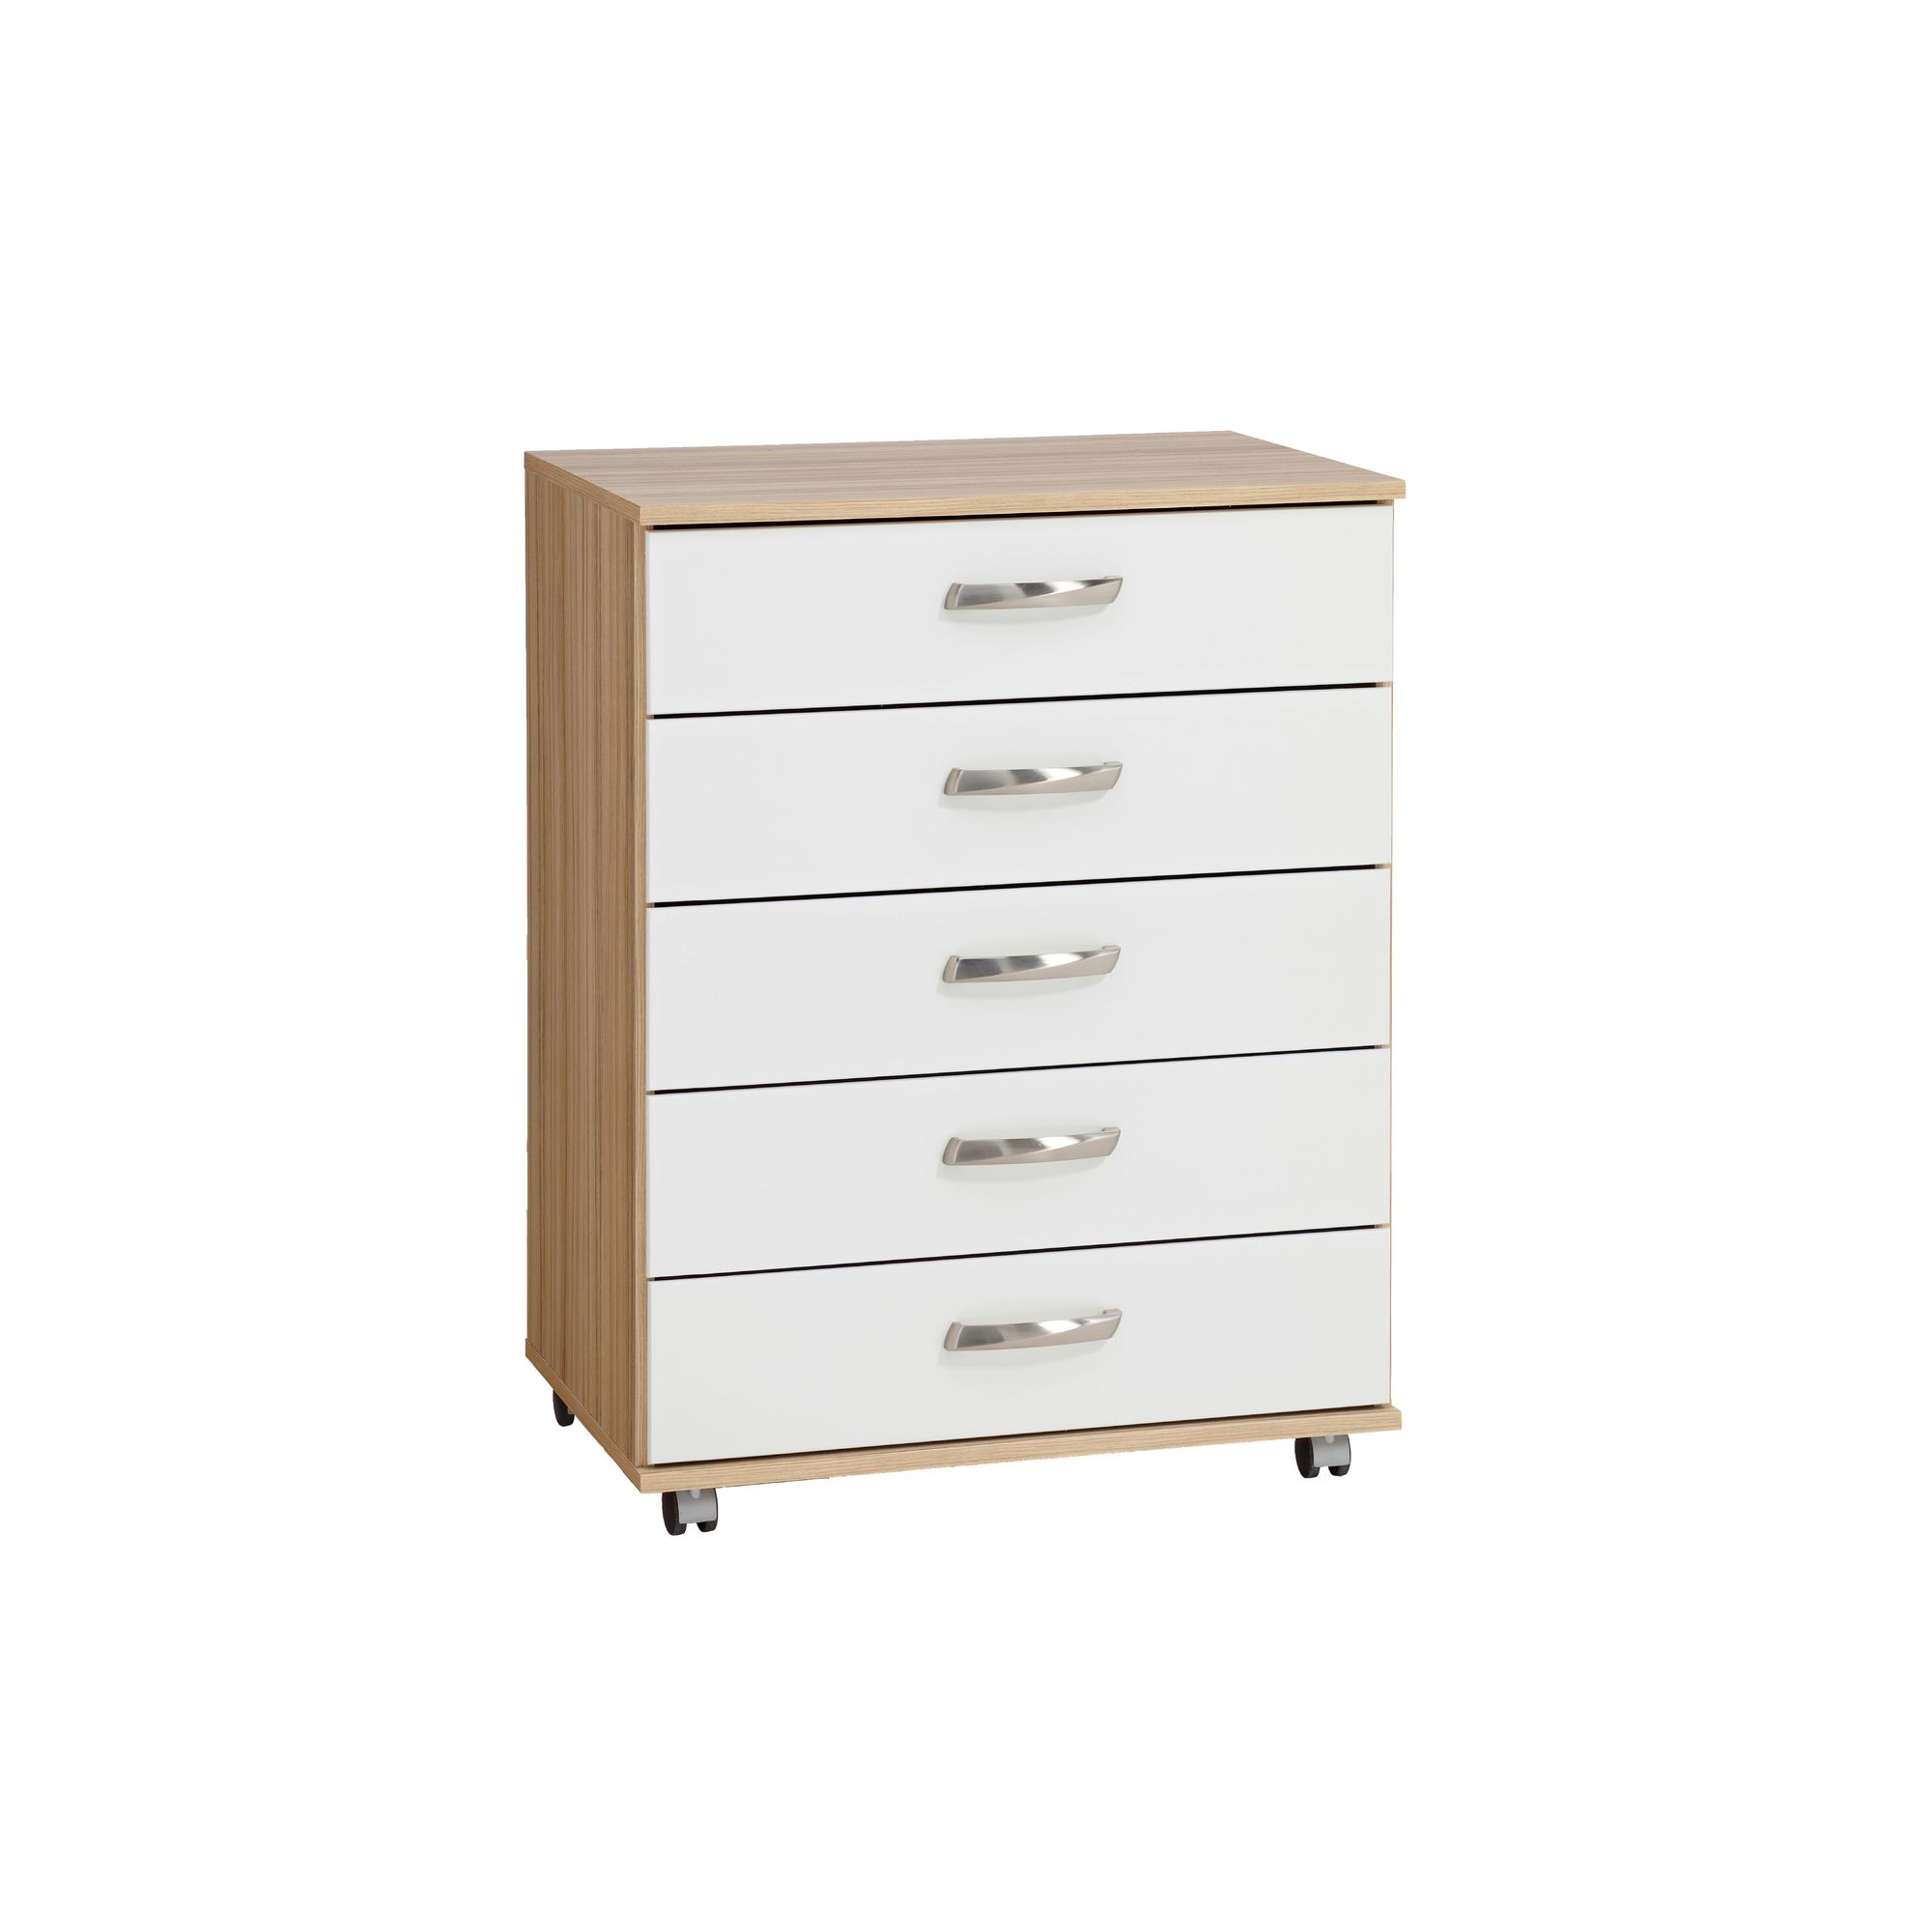 Ideal Furniture Regal 5 Drawer Chest in white at Tesco Direct